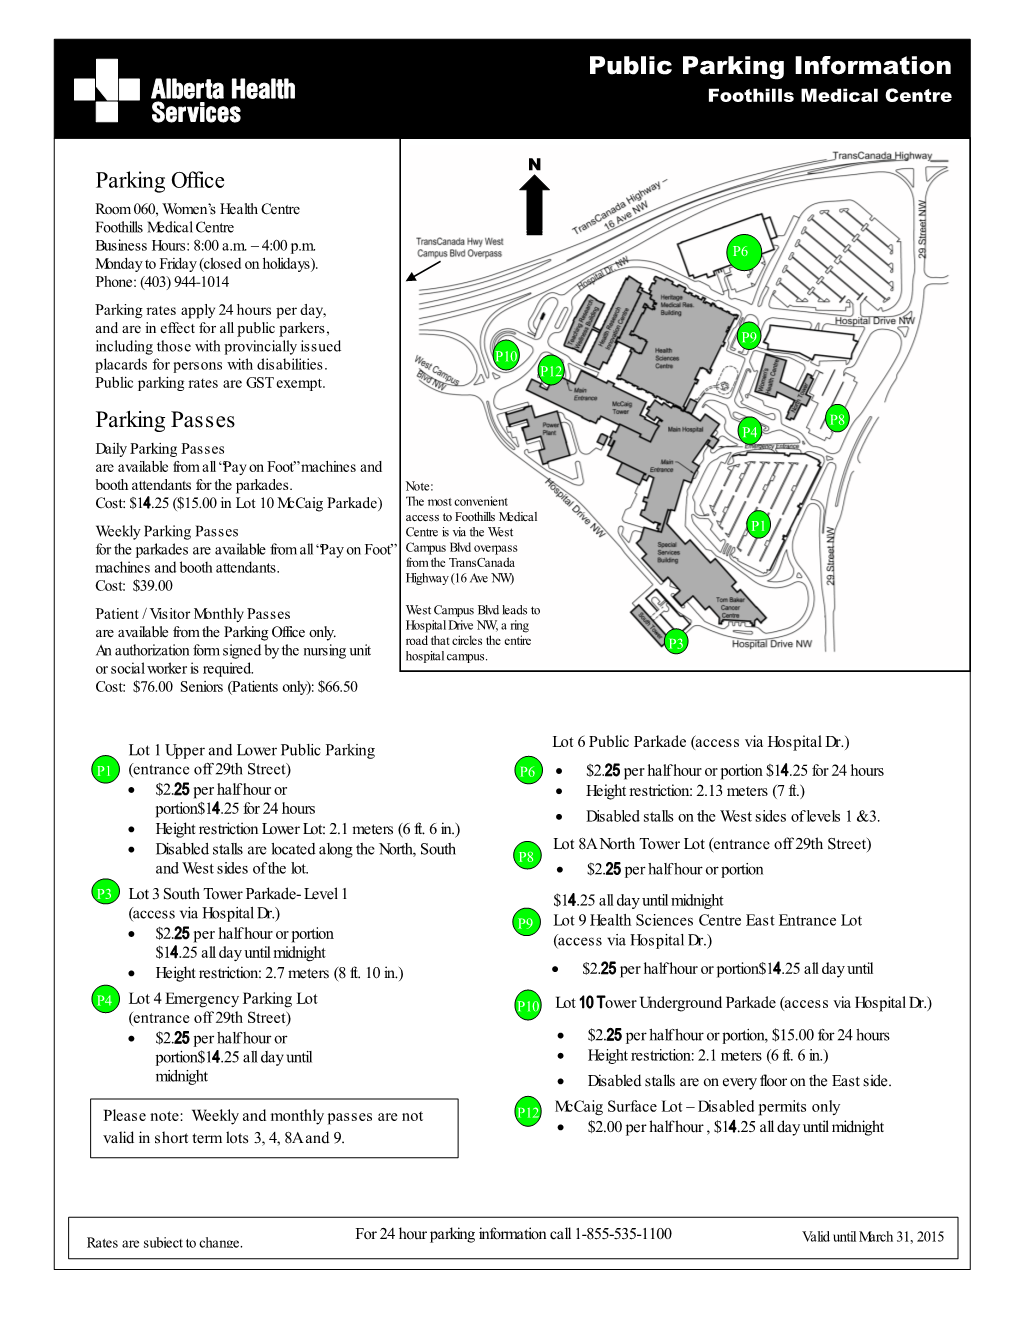 Public Parking Information and Map- Foothills Medical Centre